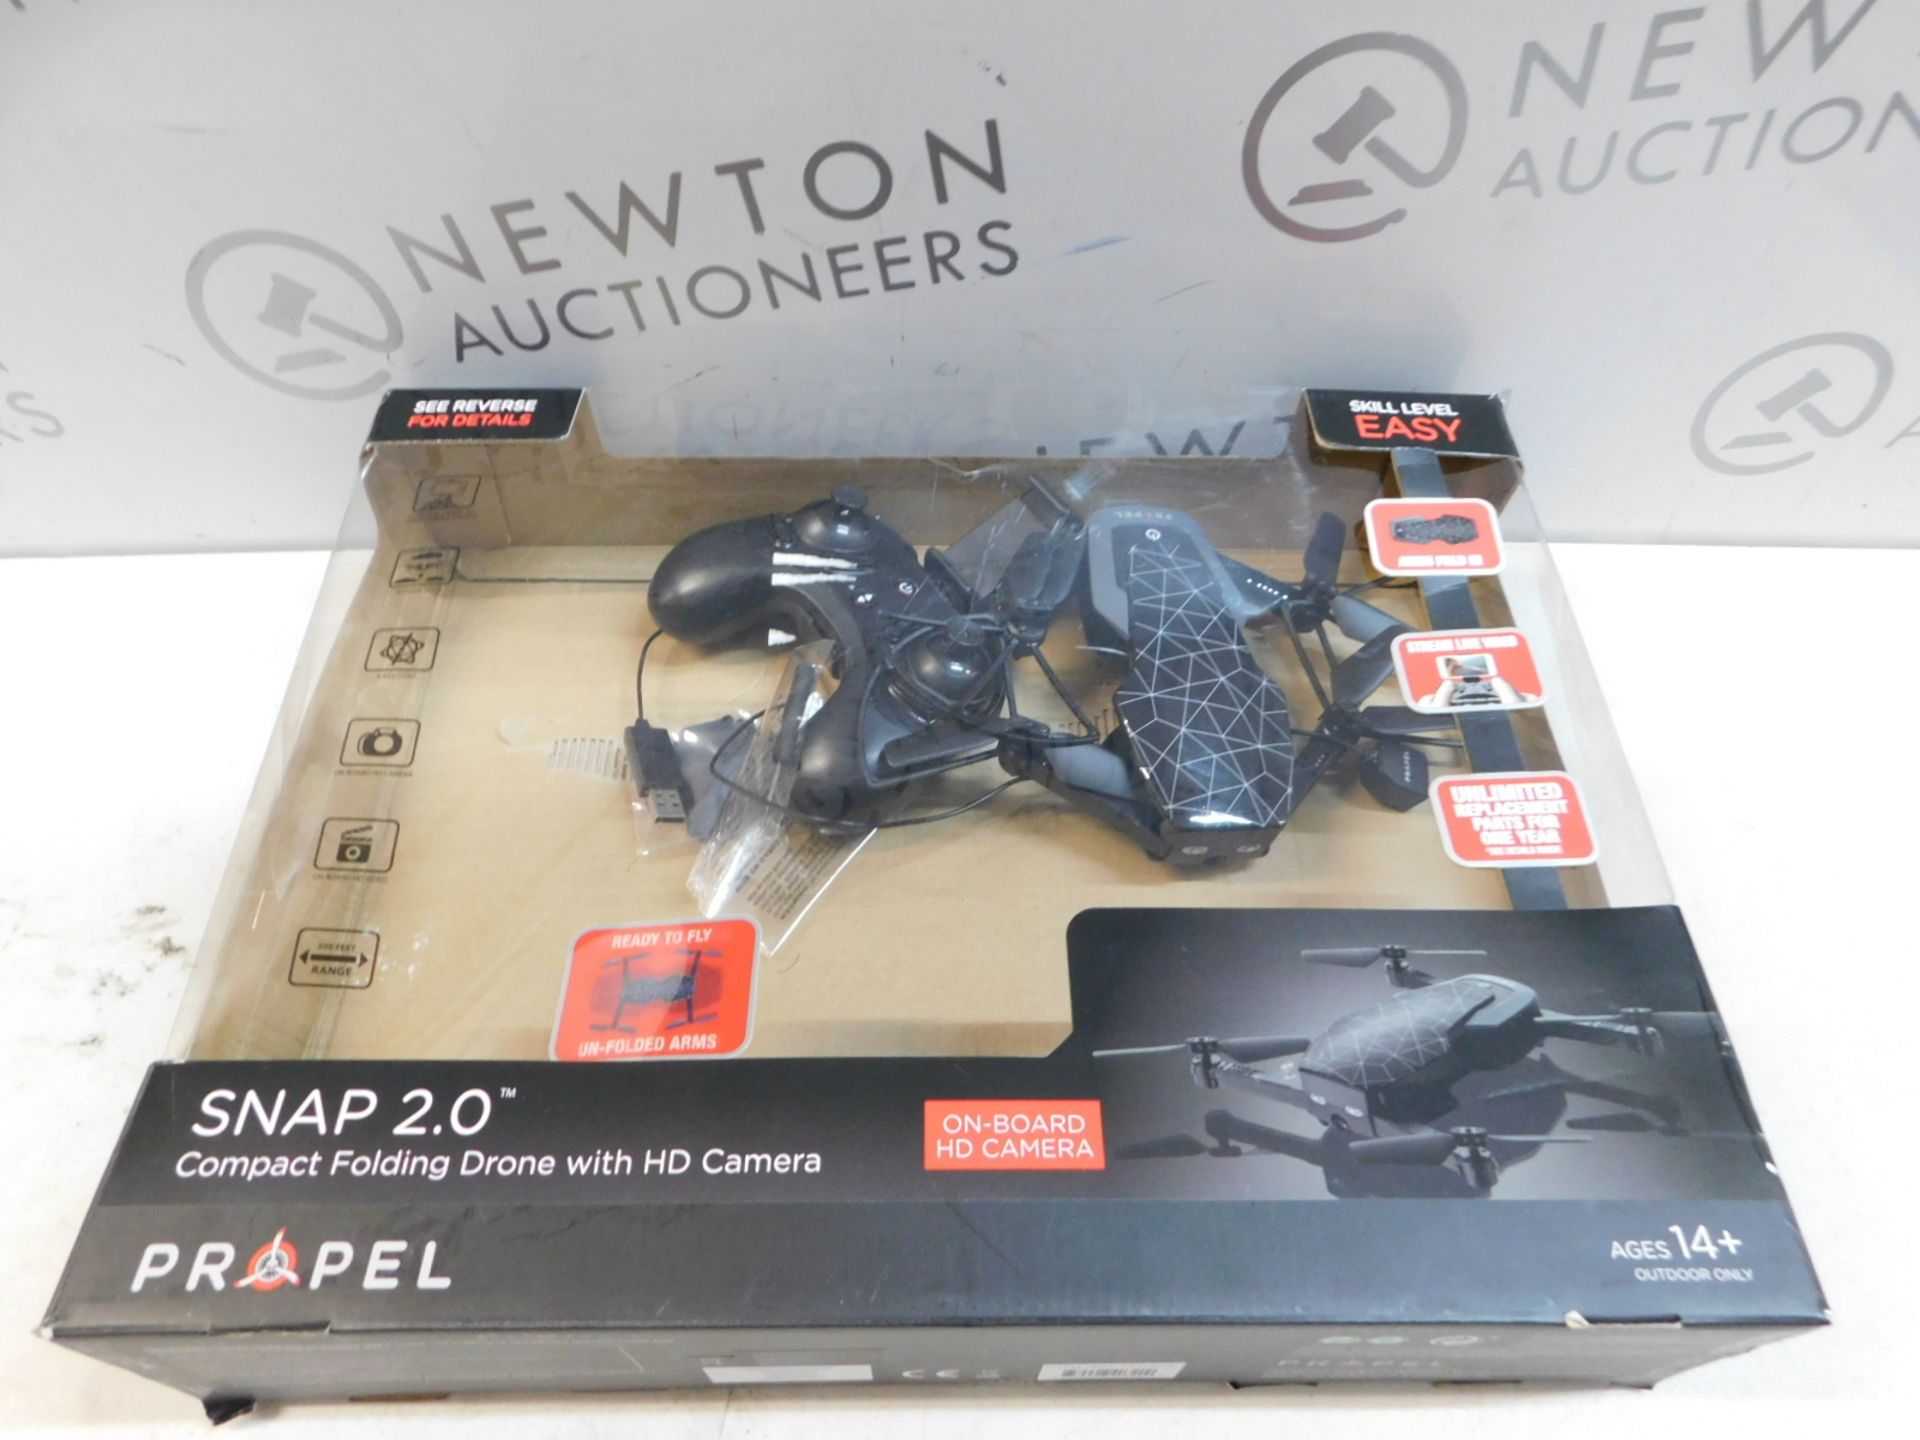 1 BOXED PROPEL SNAP 2.0 COMPACT FOLDING DRONE WITH HD CAMERA RRP Â£89.99